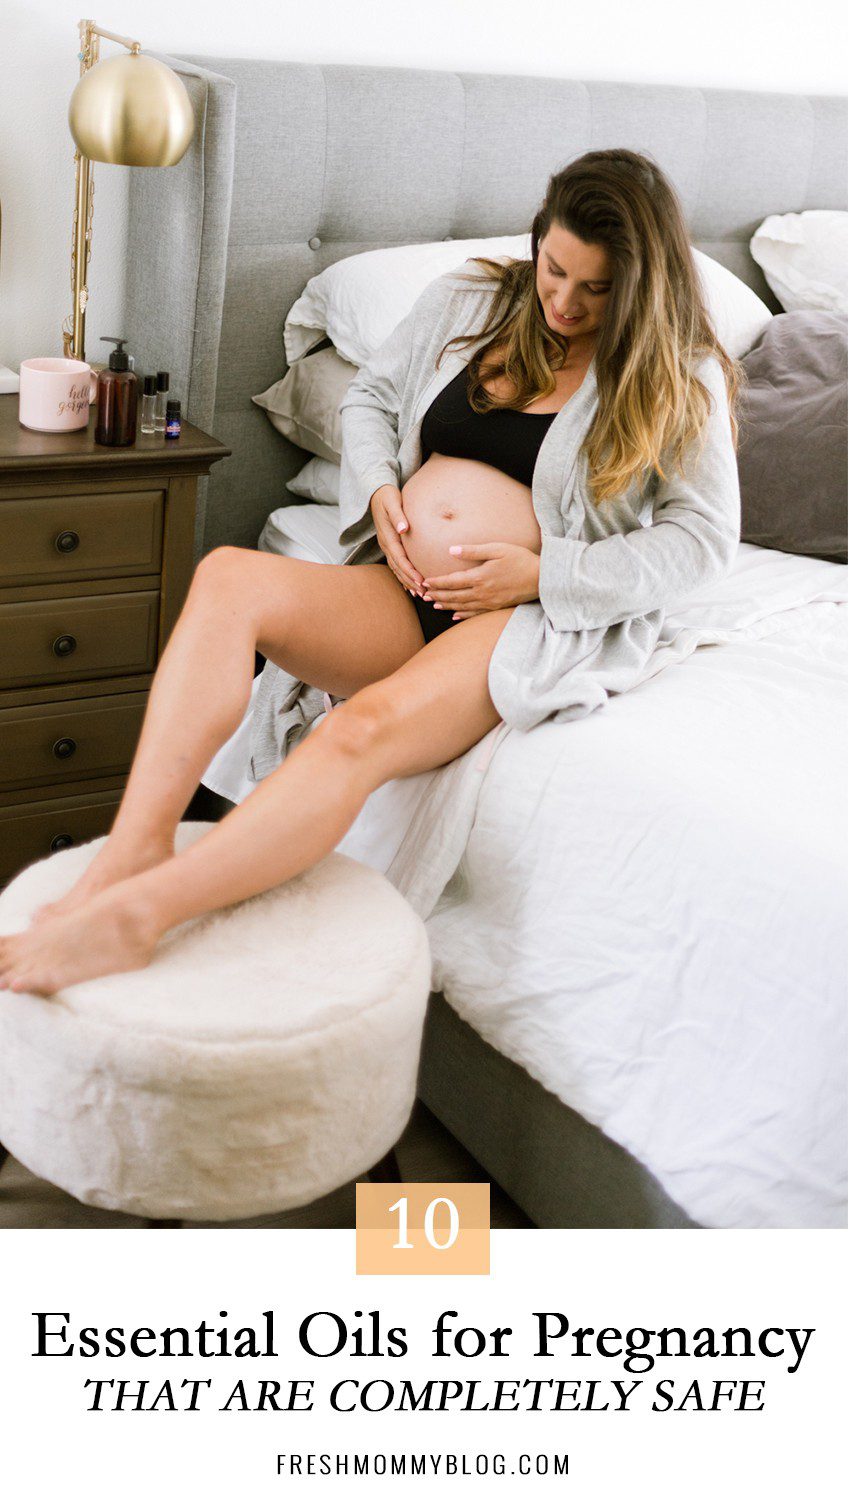 Top 10 Essential Oils While Pregnant That are Completely Safe by popular Florida lifestyle blog, Fresh Mommy: image of woman sitting on her bed in a grey robe, black sports bra, and black underwear and looking down at her pregnant belly while she places her hand on it.